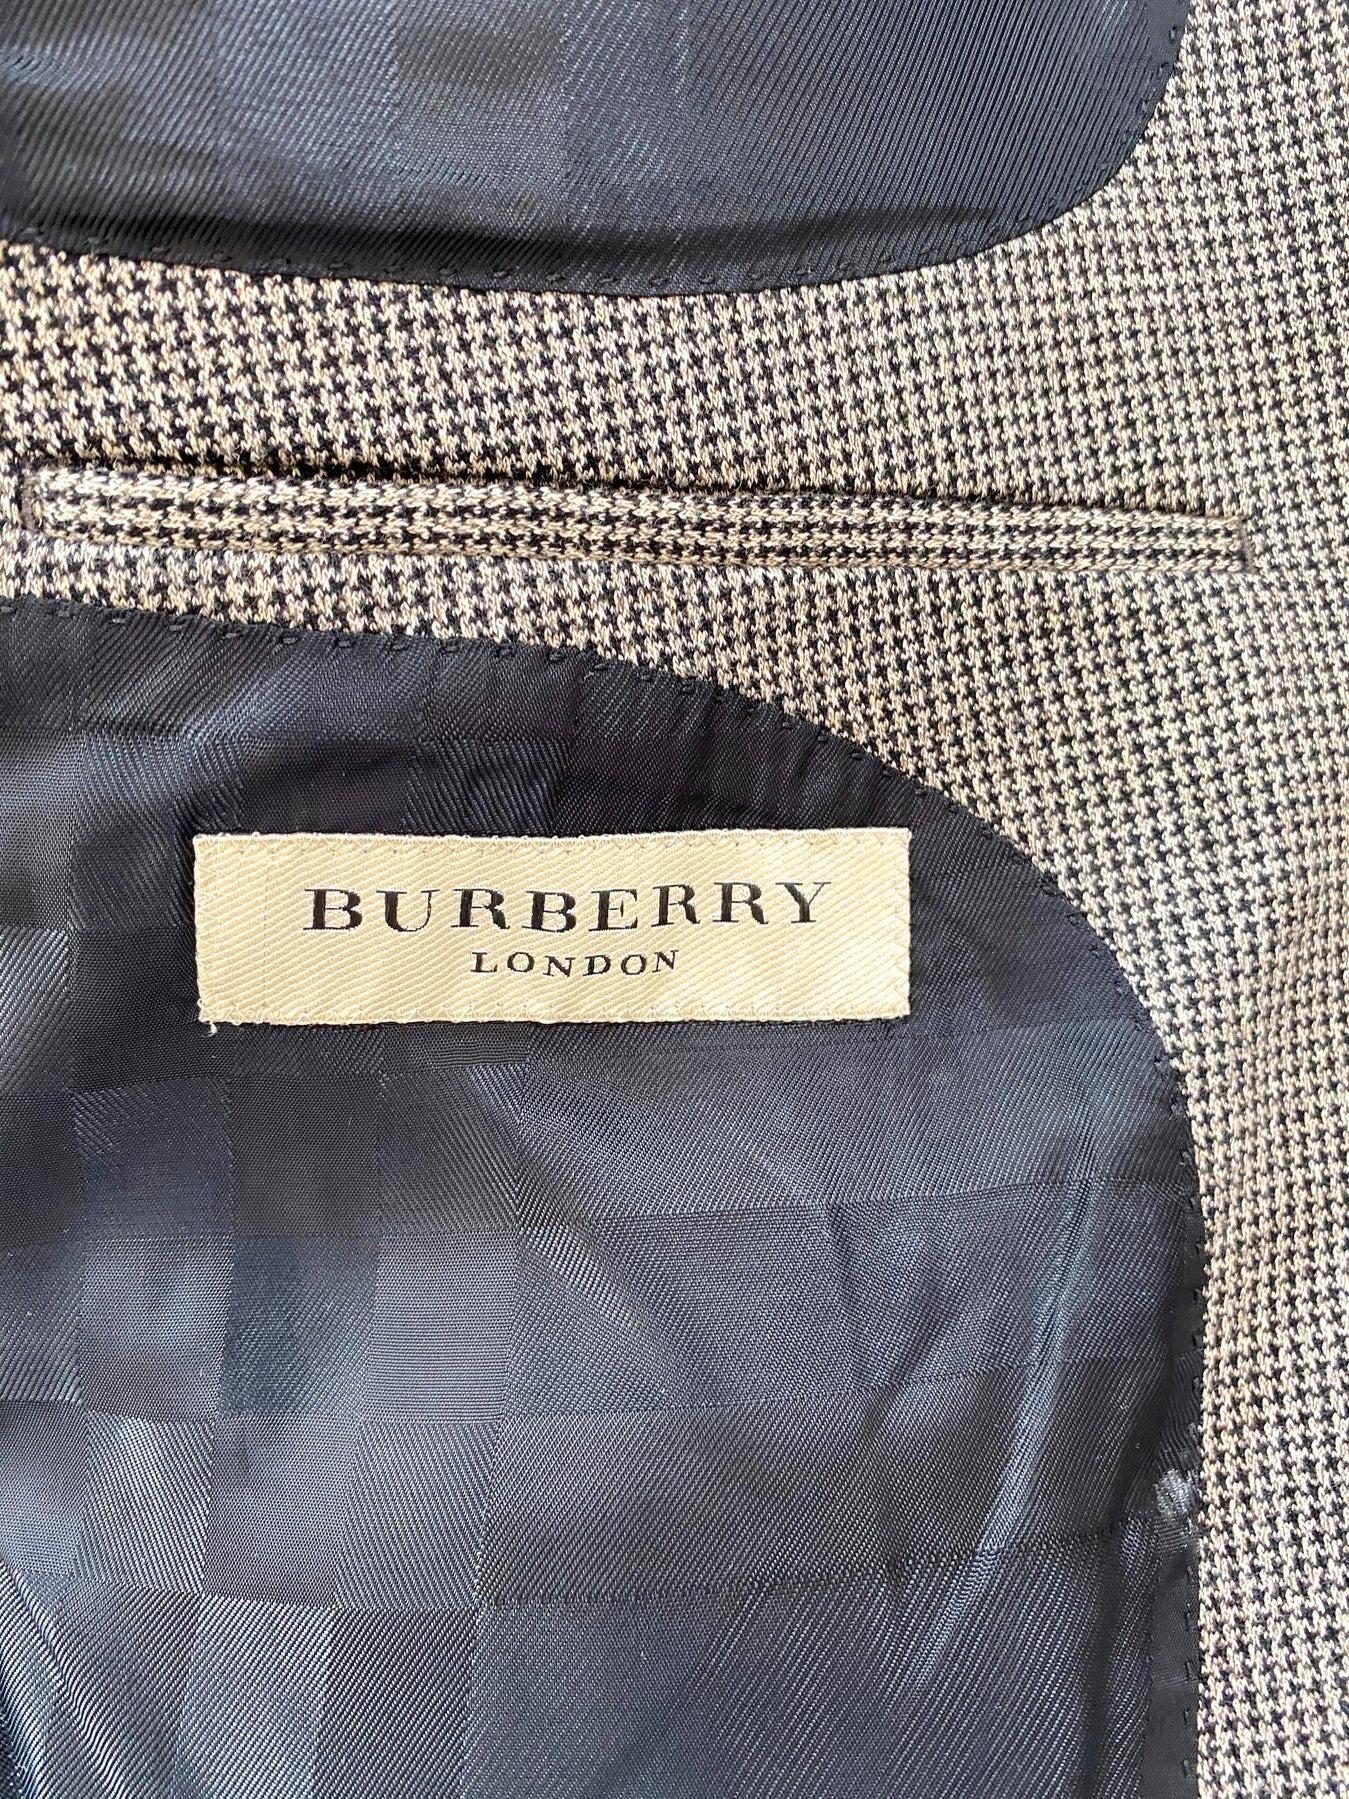 Burberry Houndstooth Jacket For Sale 4